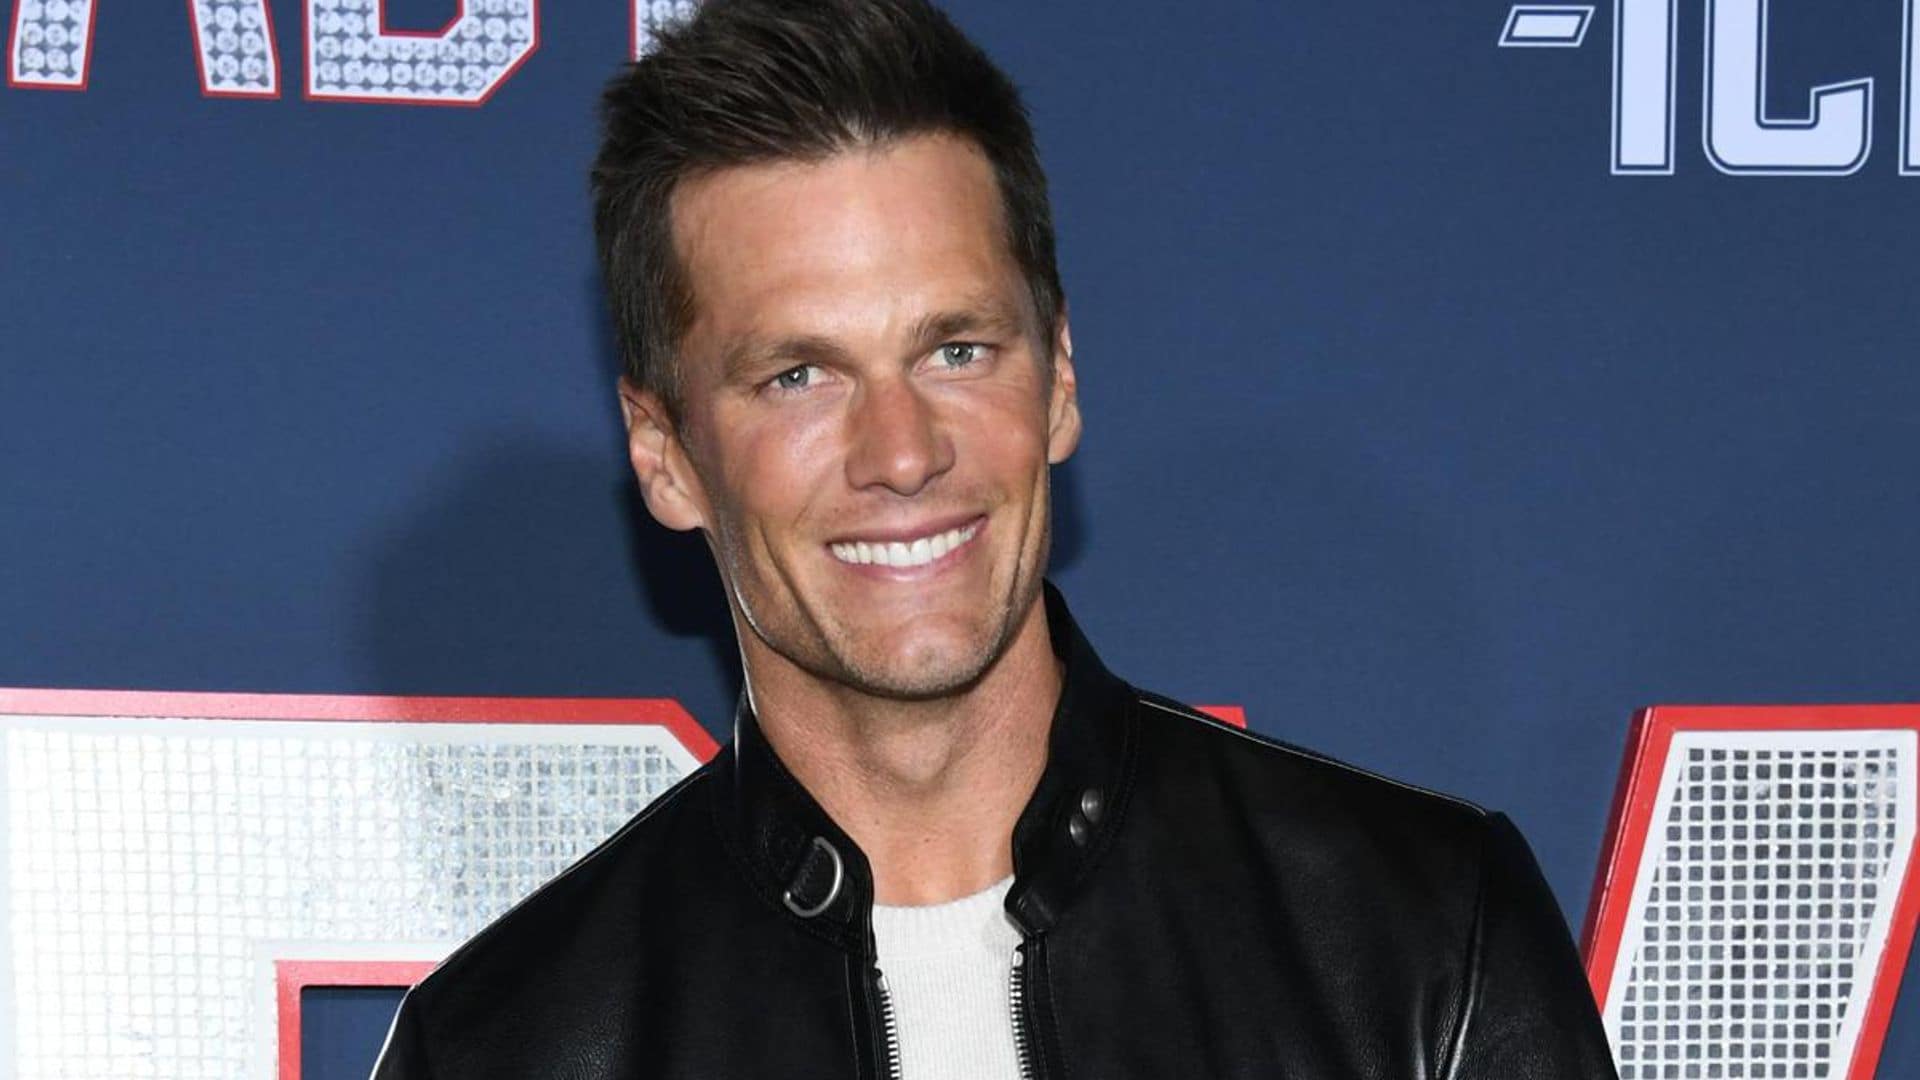 Tom Brady jokes about ‘bad parenting’ as he enjoys the summer with his kids